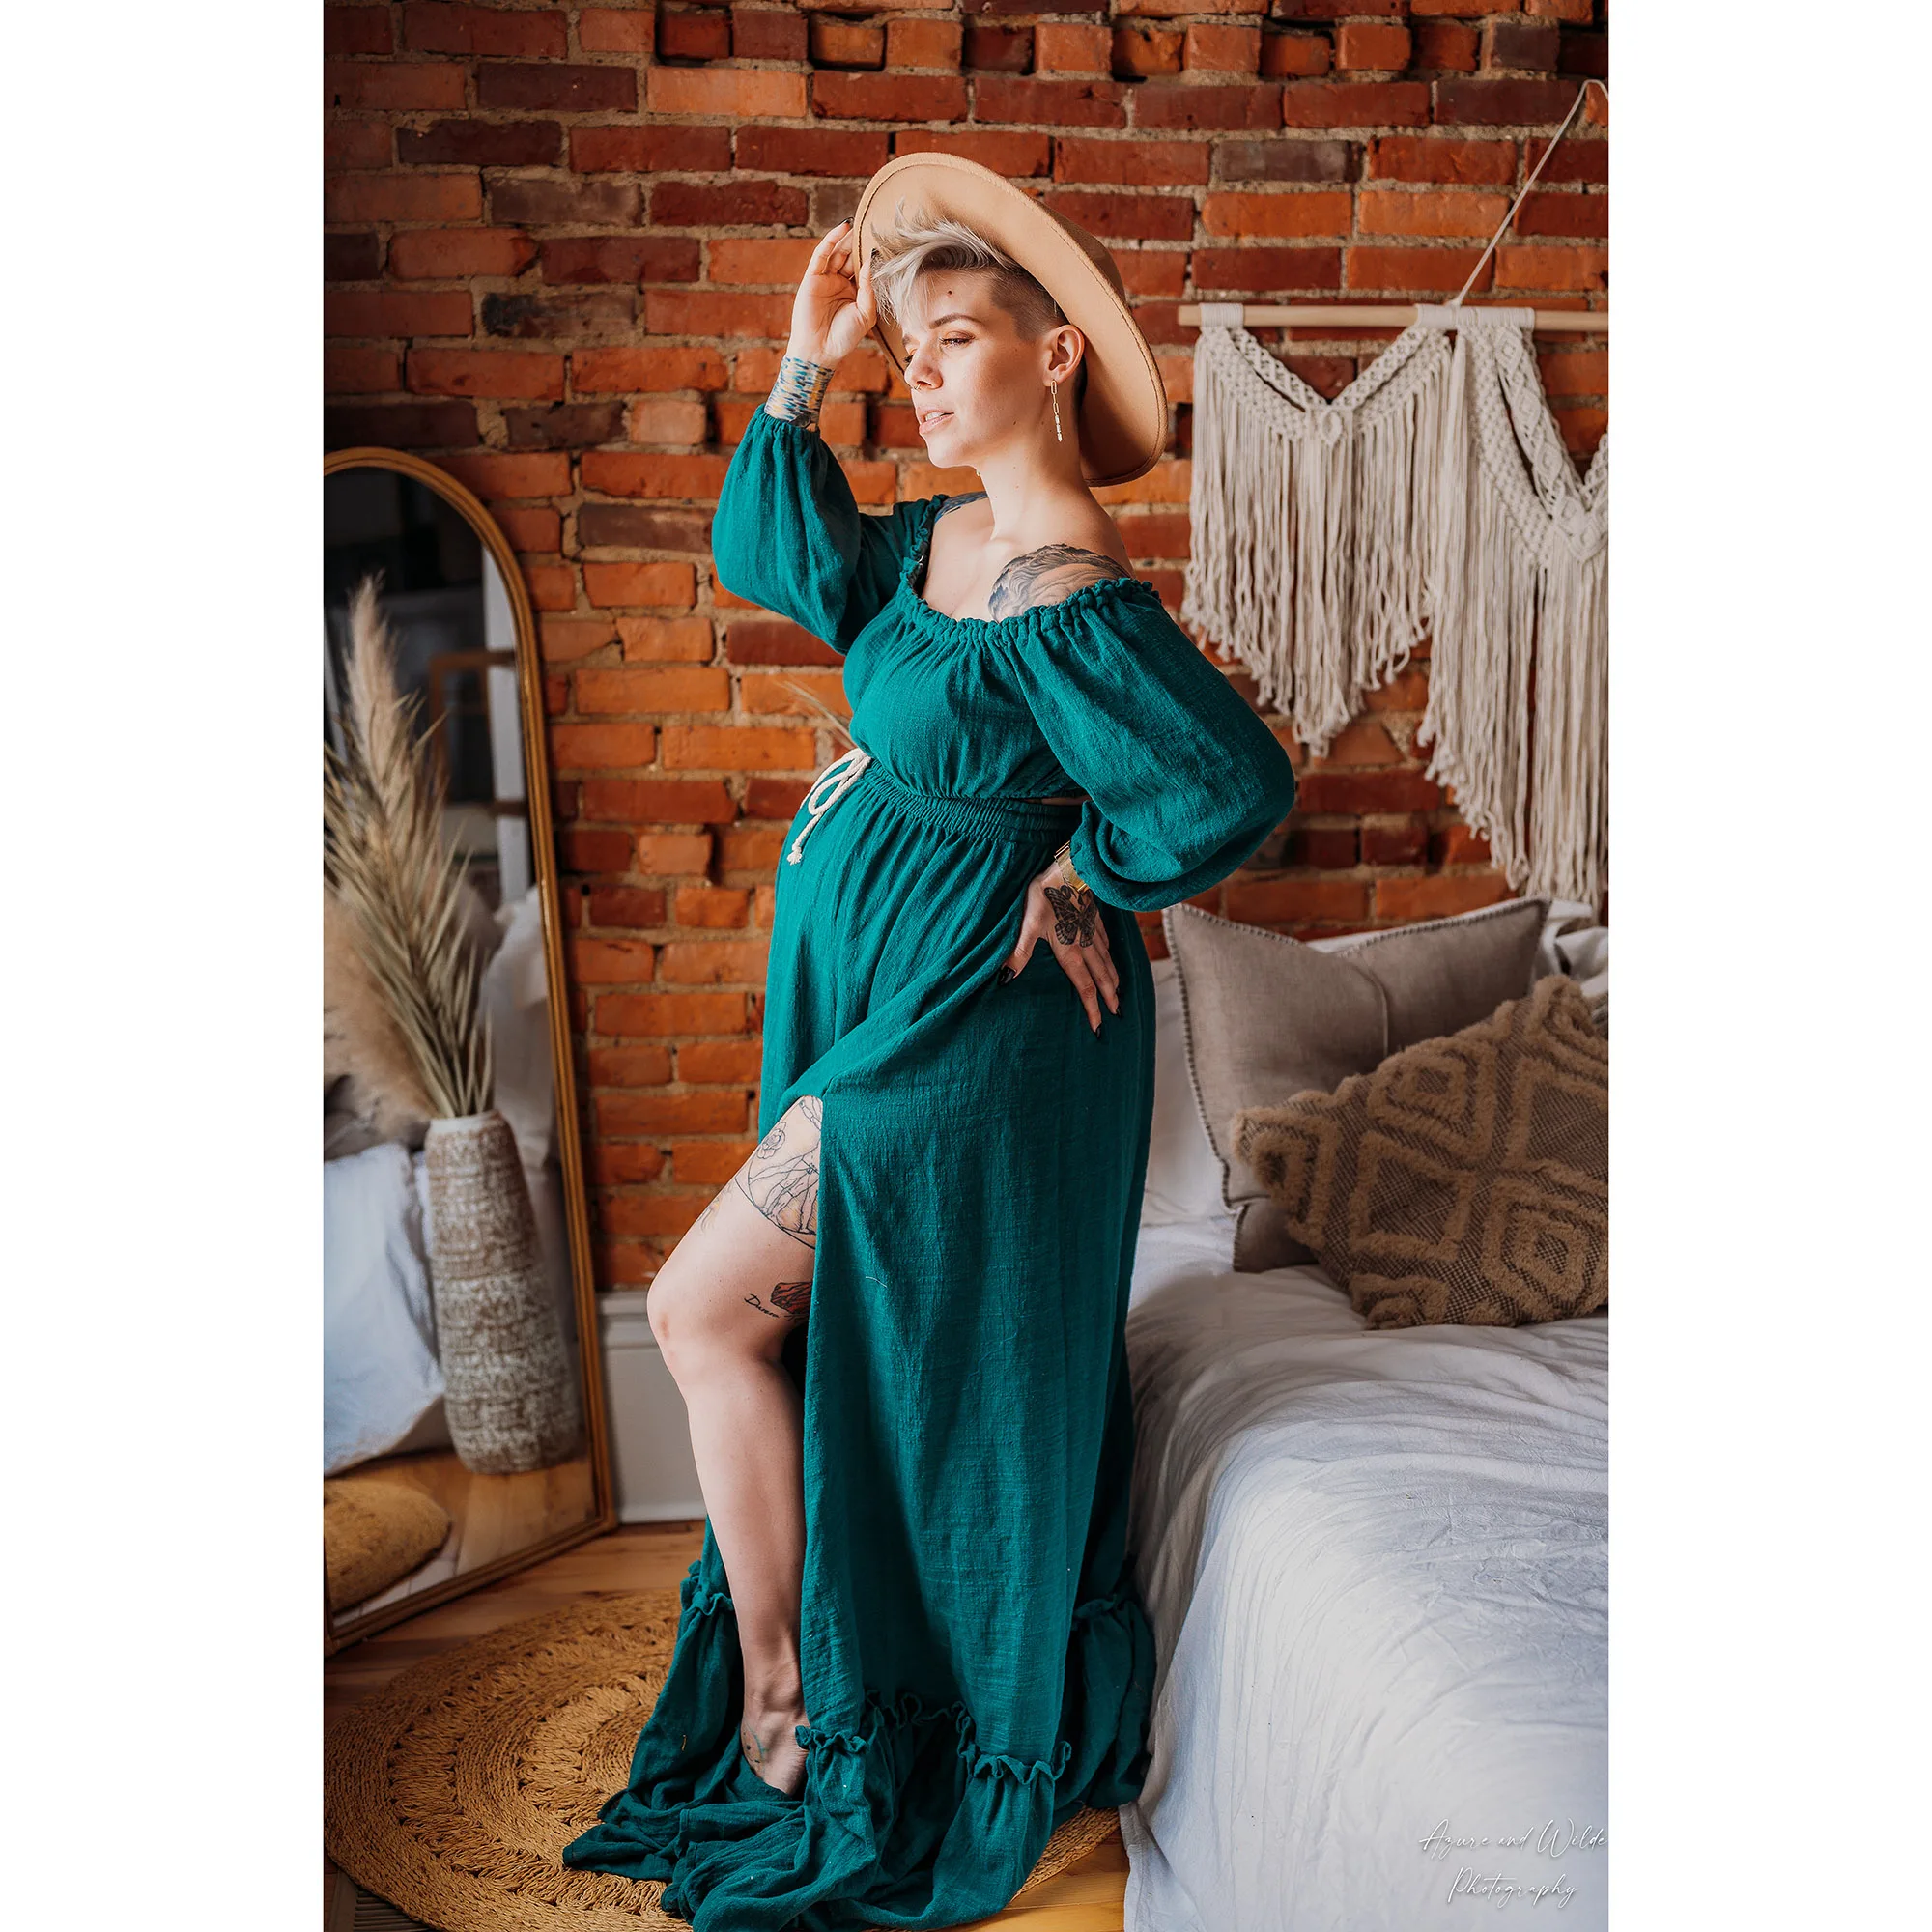 Photo Shoot Props A Suit Cotton Kaftan Full Sleeves Robe Maternity Dress Evening Party Costume for Women Photography Accessories enlarge